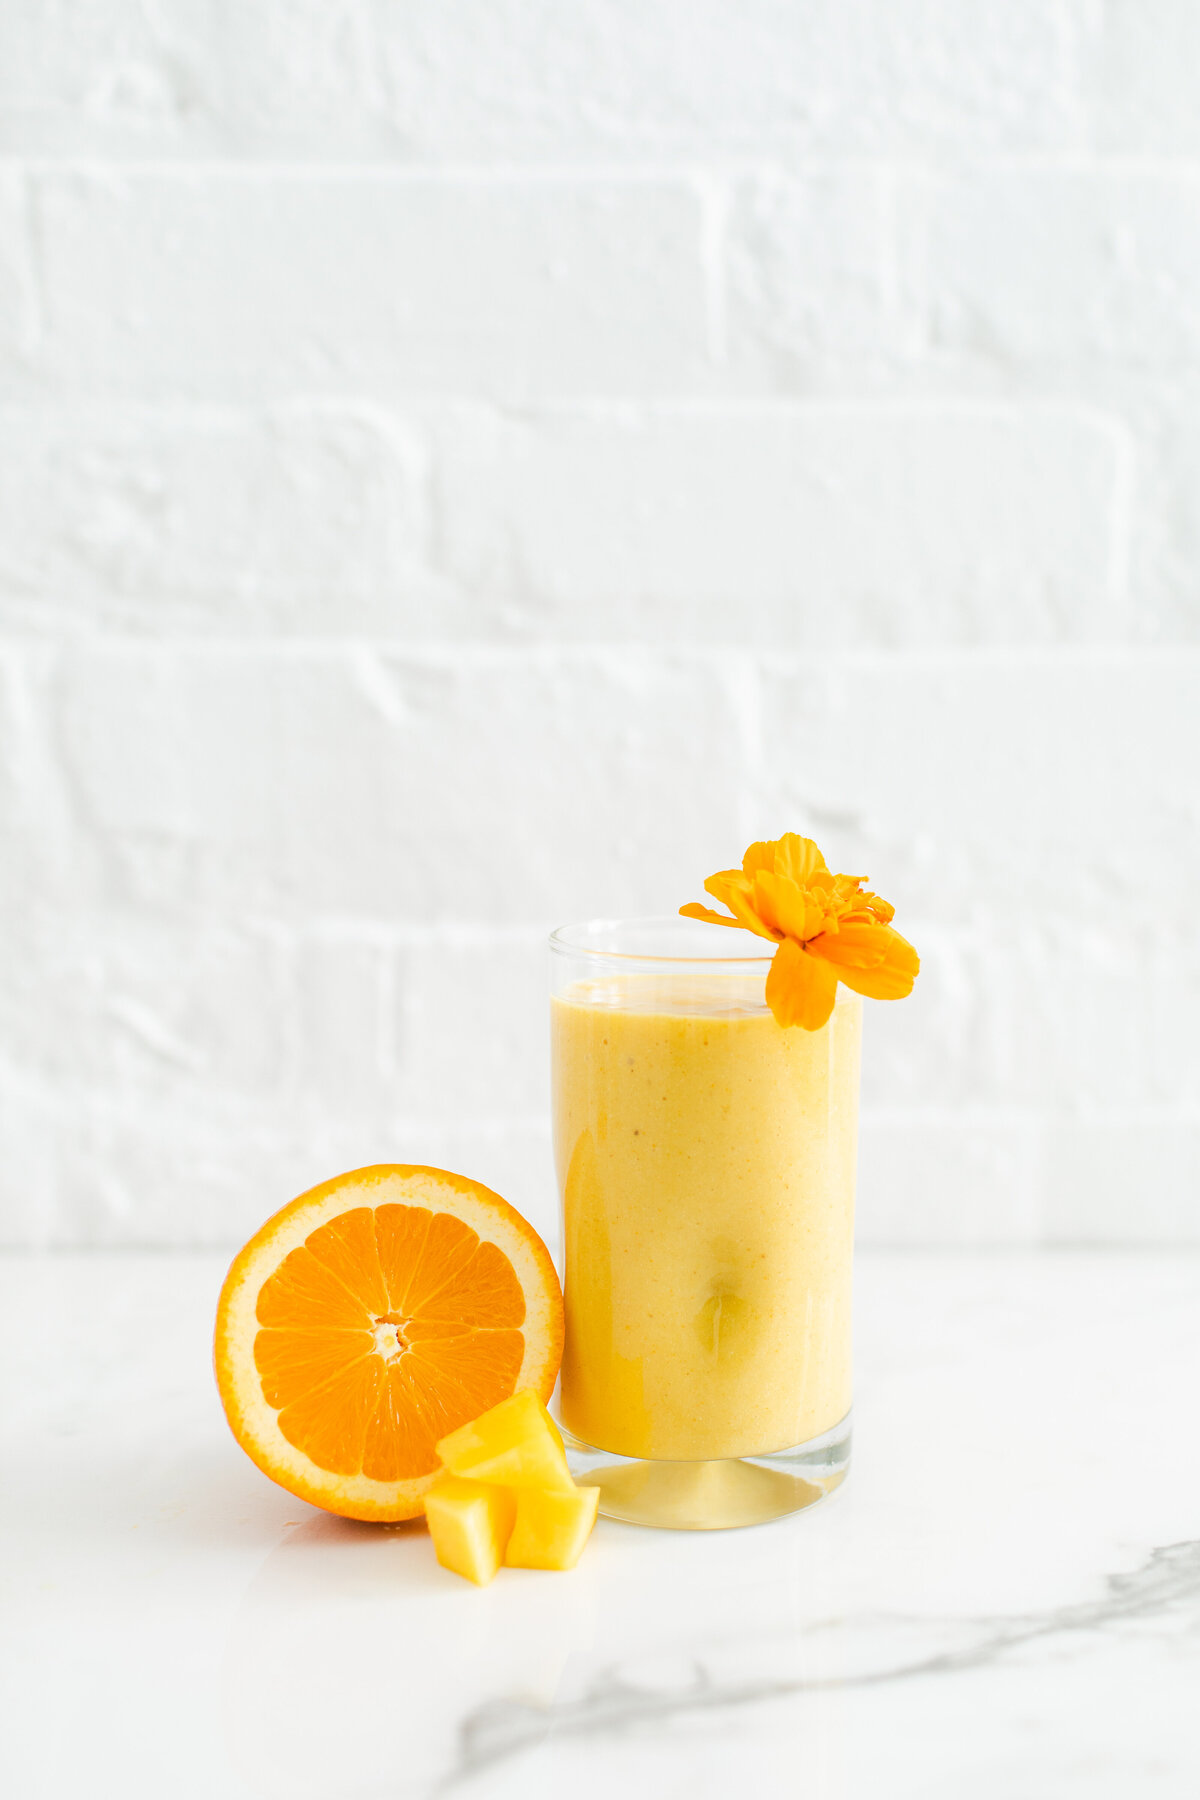 tampa-product-photography-realm-smoothies-100